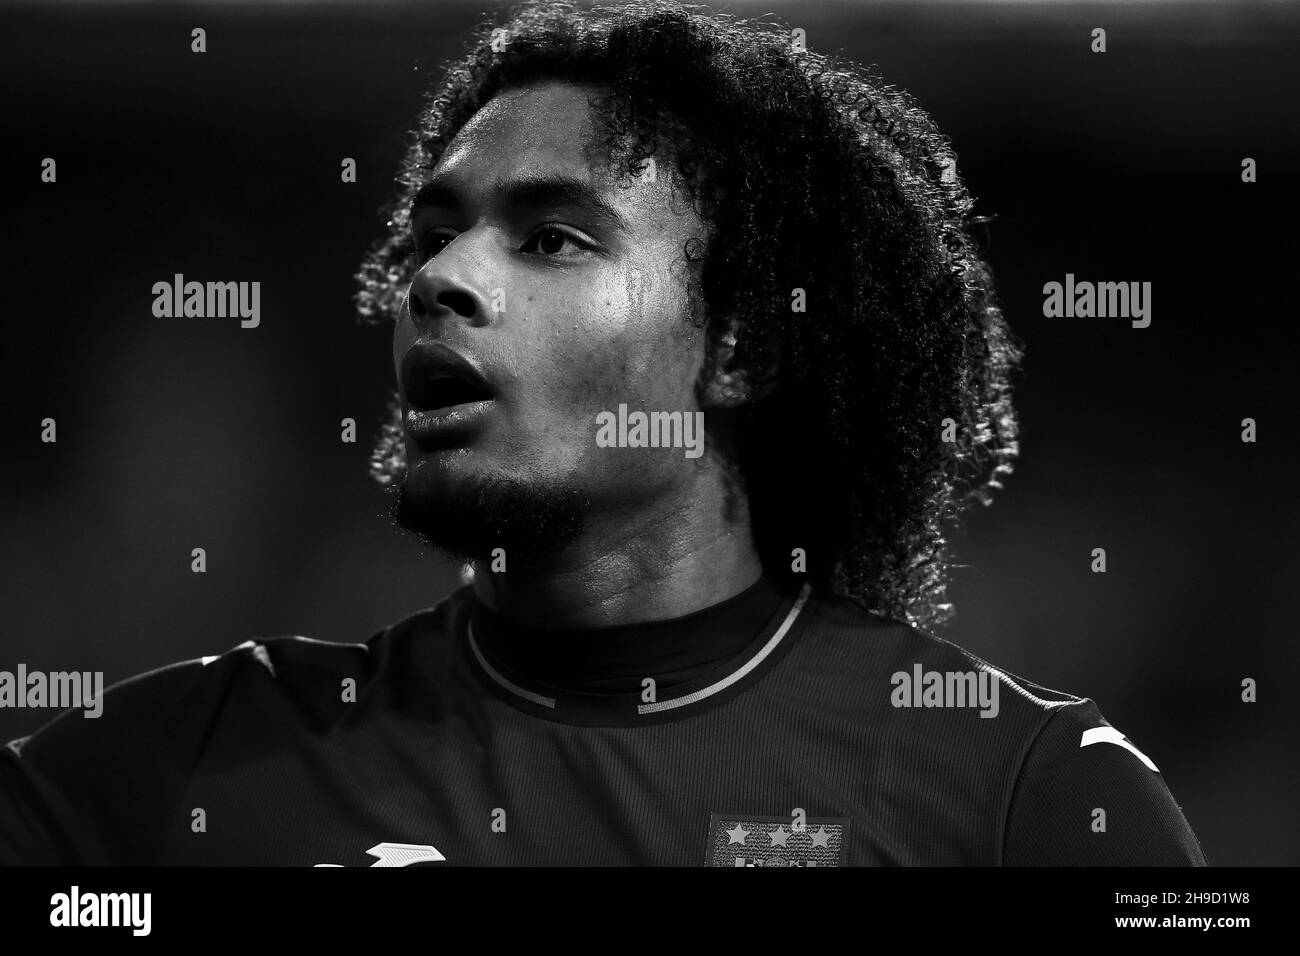 Photo lotto Black and White Stock Photos & Images - Alamy